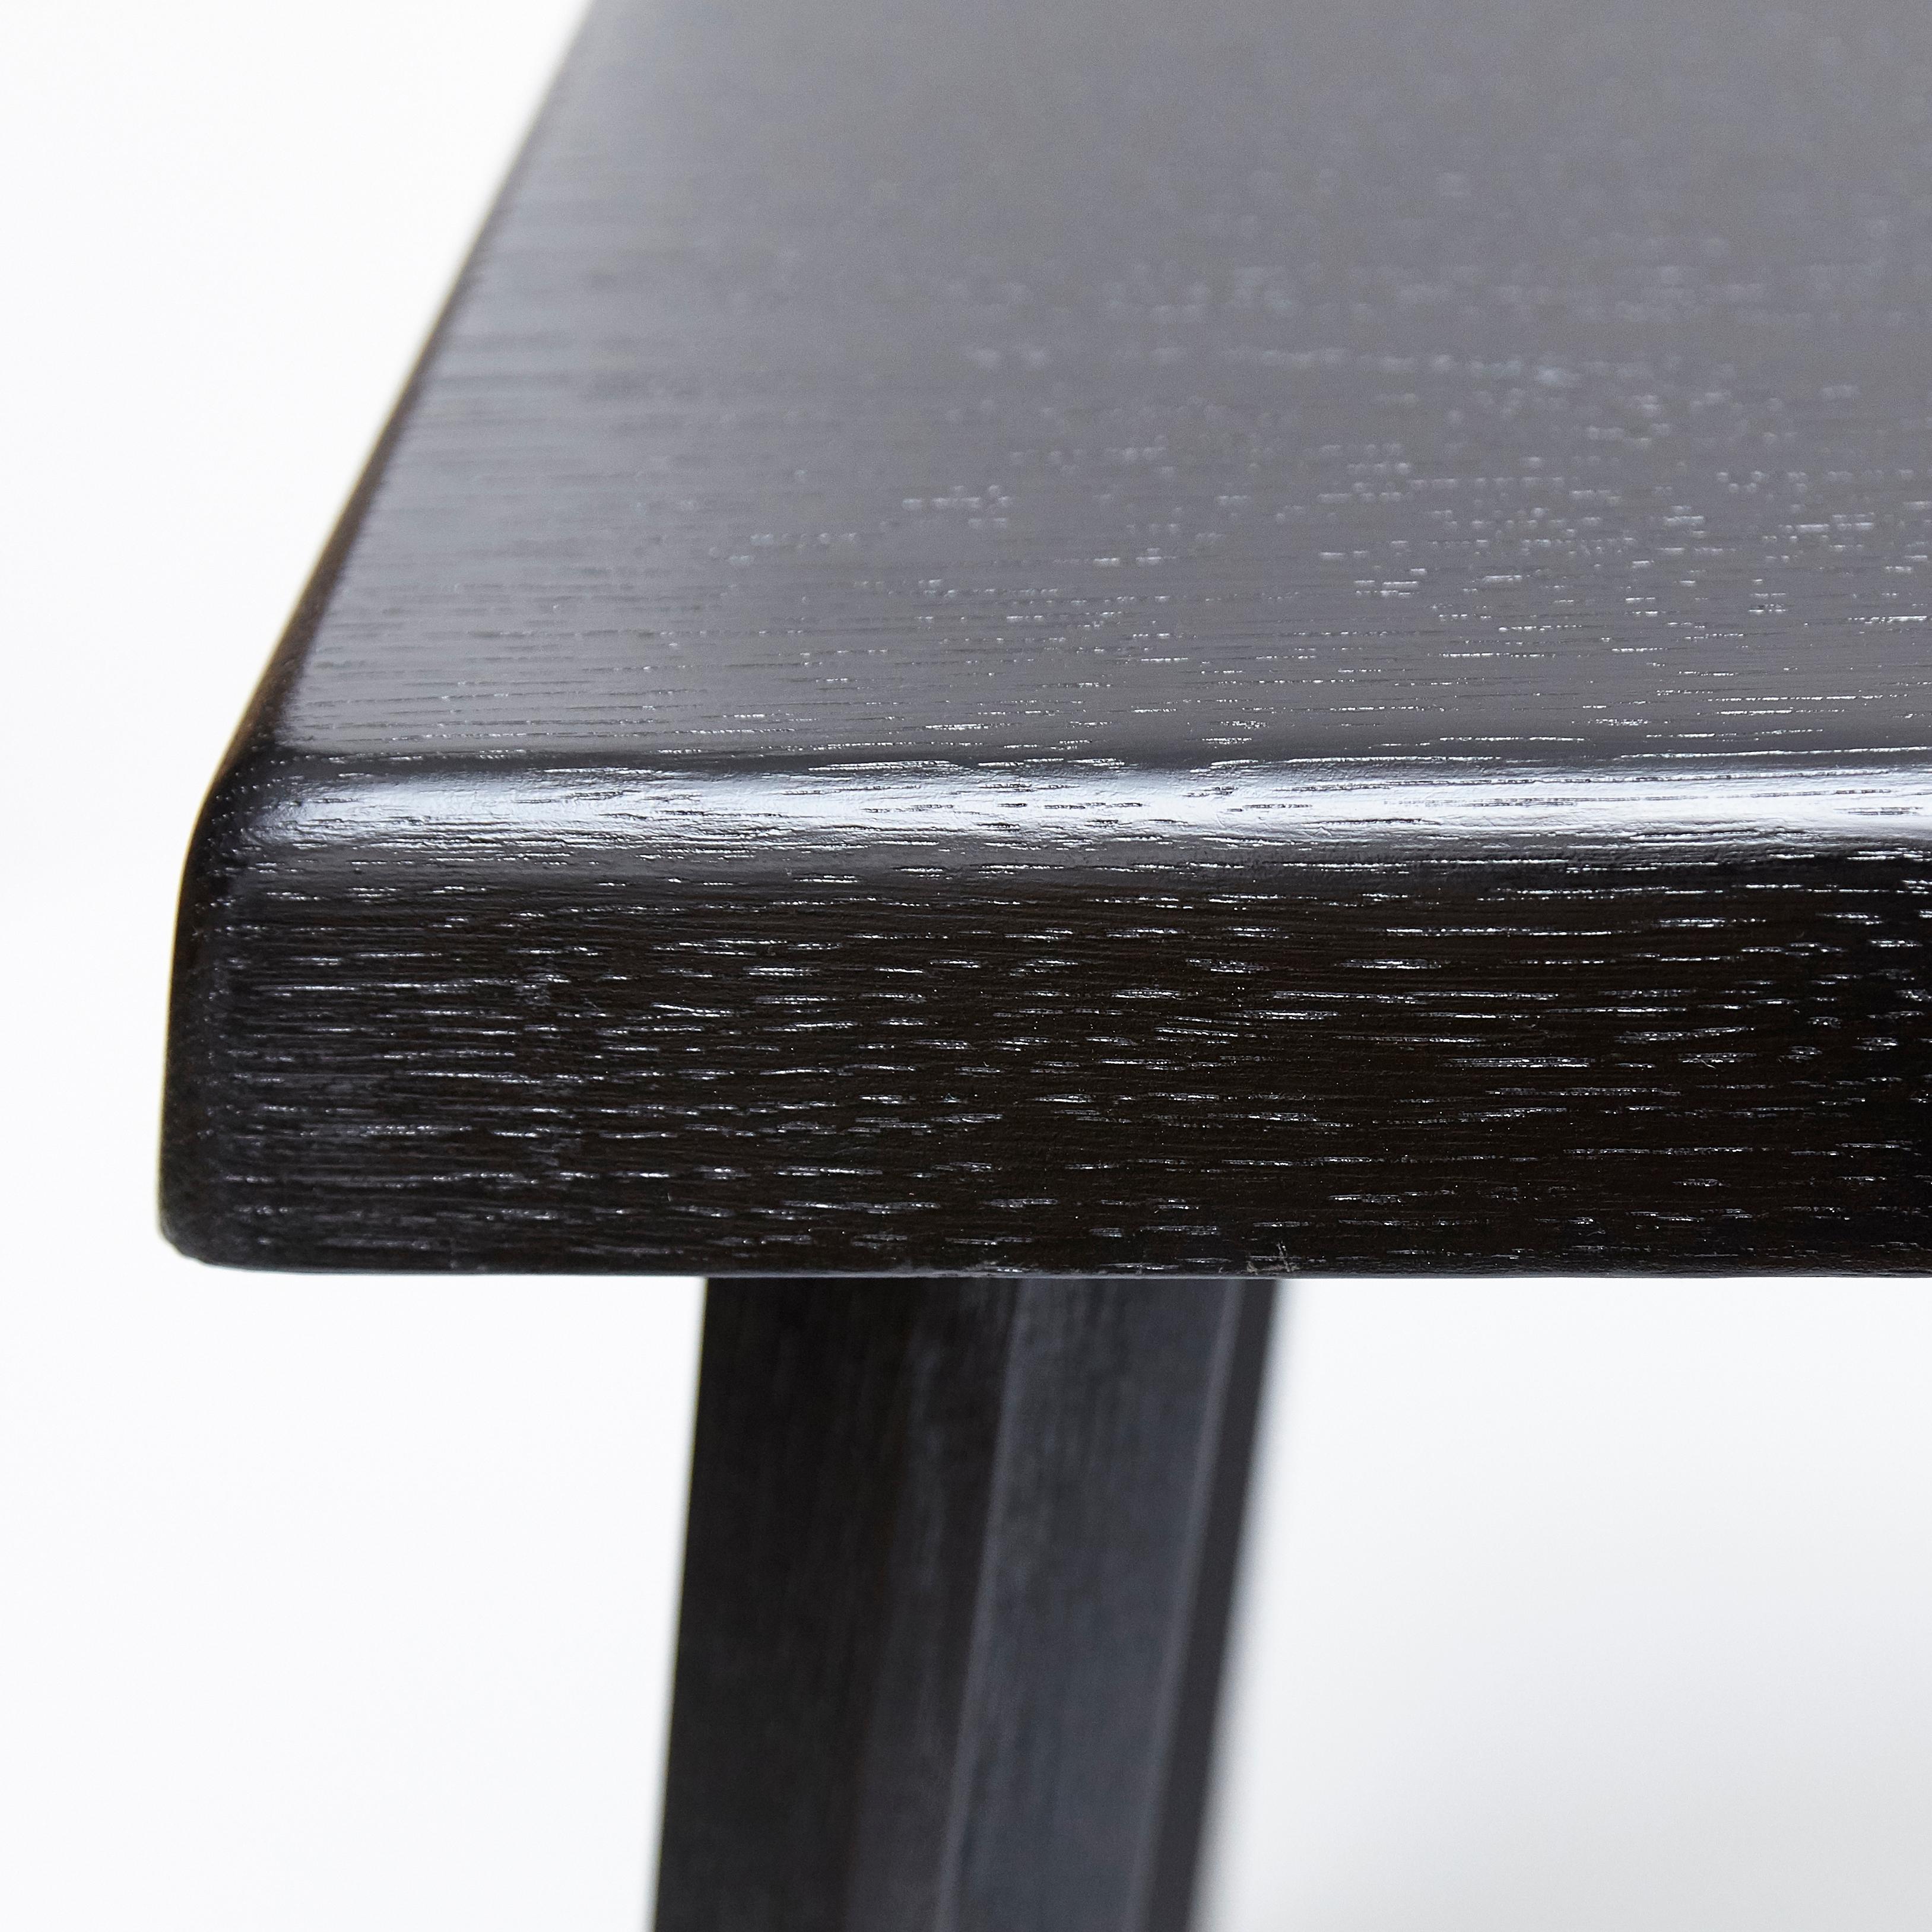 Wood Pierre Chapo Special Black Edition Stool